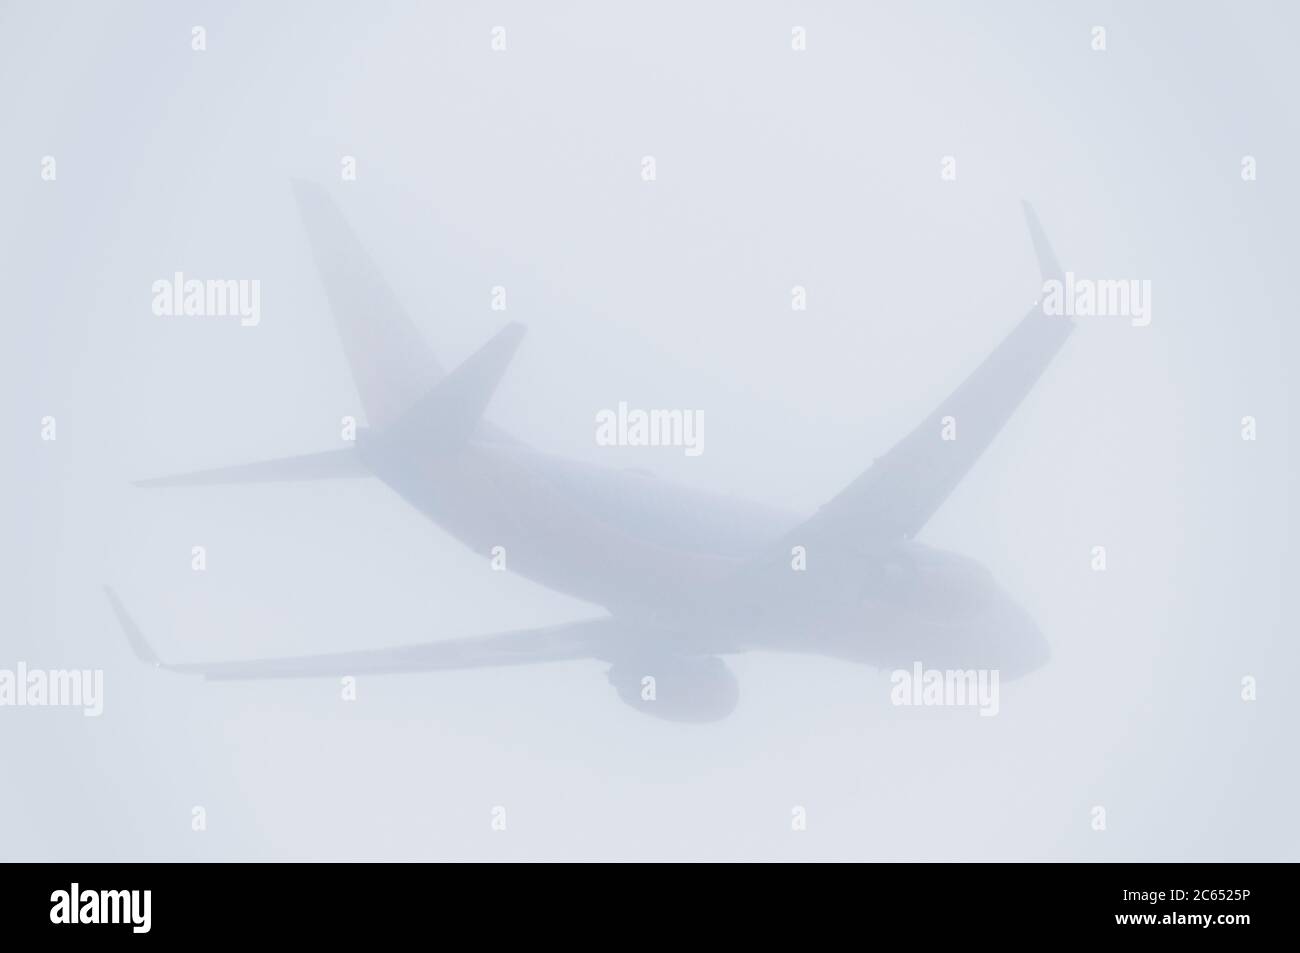 Boeing 737 Jet Airplane Flying in Fog Stock Photo